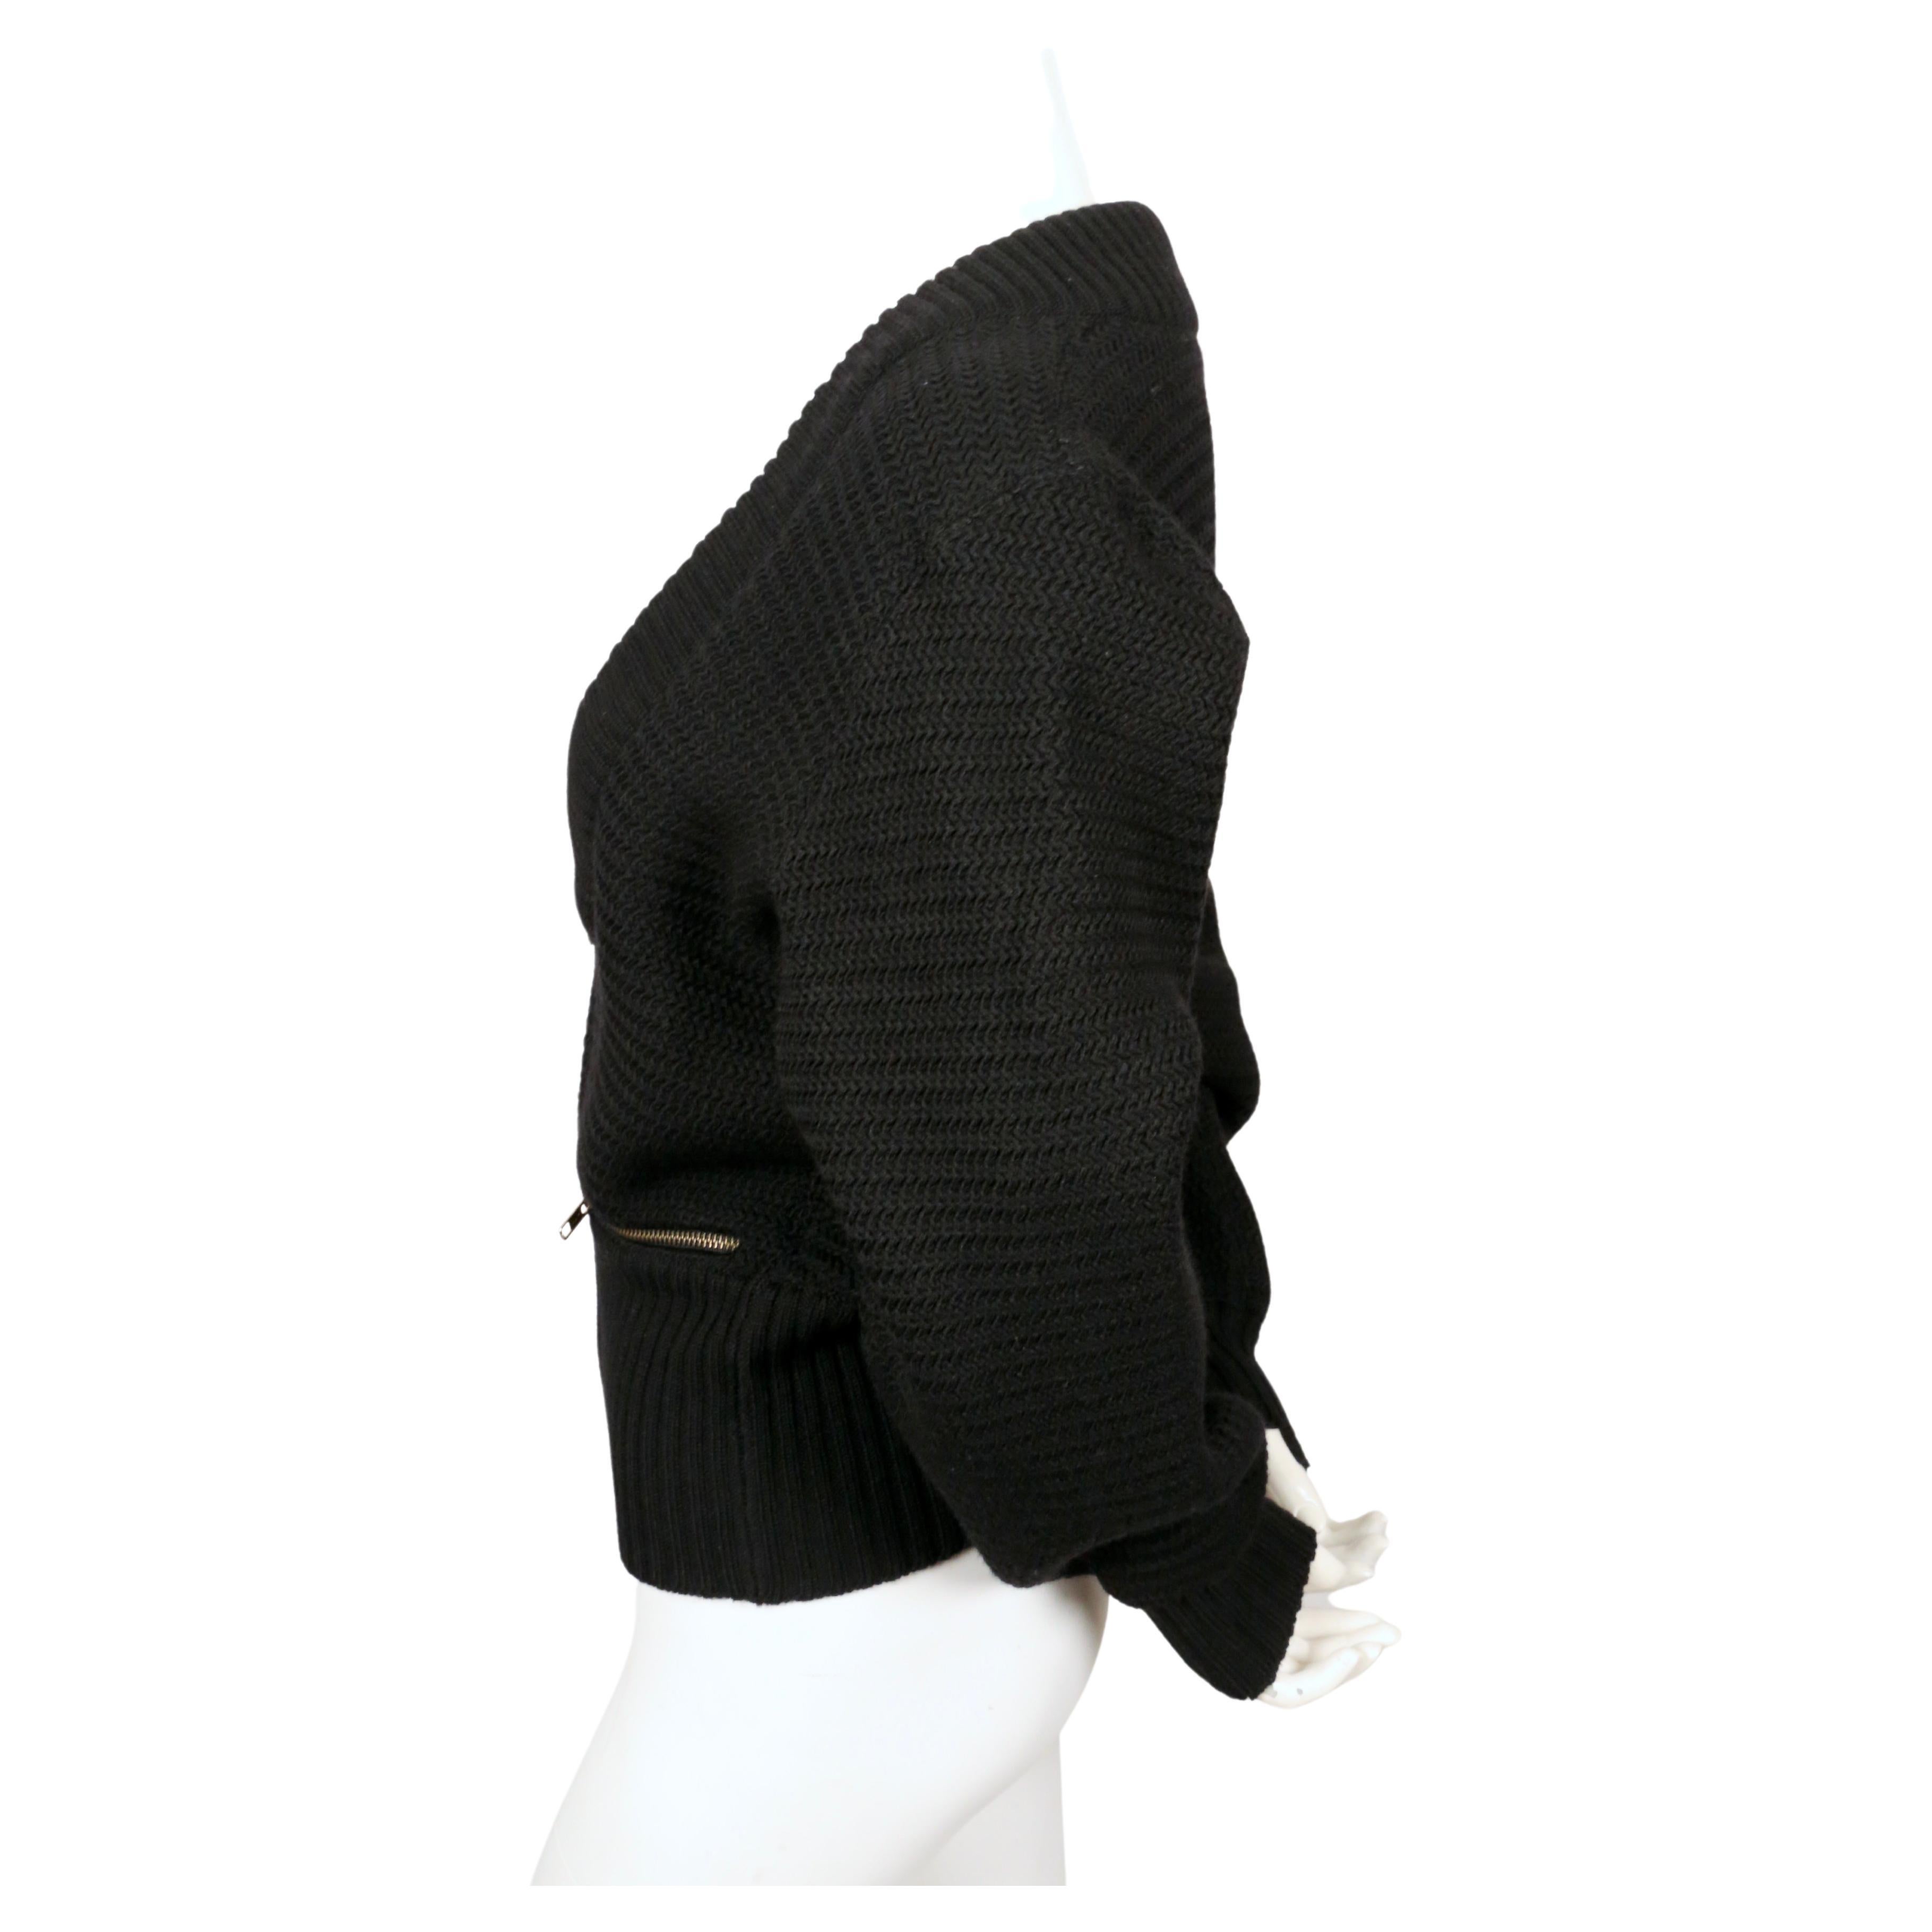 Black, densely knit wool cardigan sweater jacket with brass zippers and ribbed trim from Azzedine Alaia dating to fall of 1986 as seen on the runway. Size 'XS' although it can also fit a S. Approximate measurements: drop shoulder 19